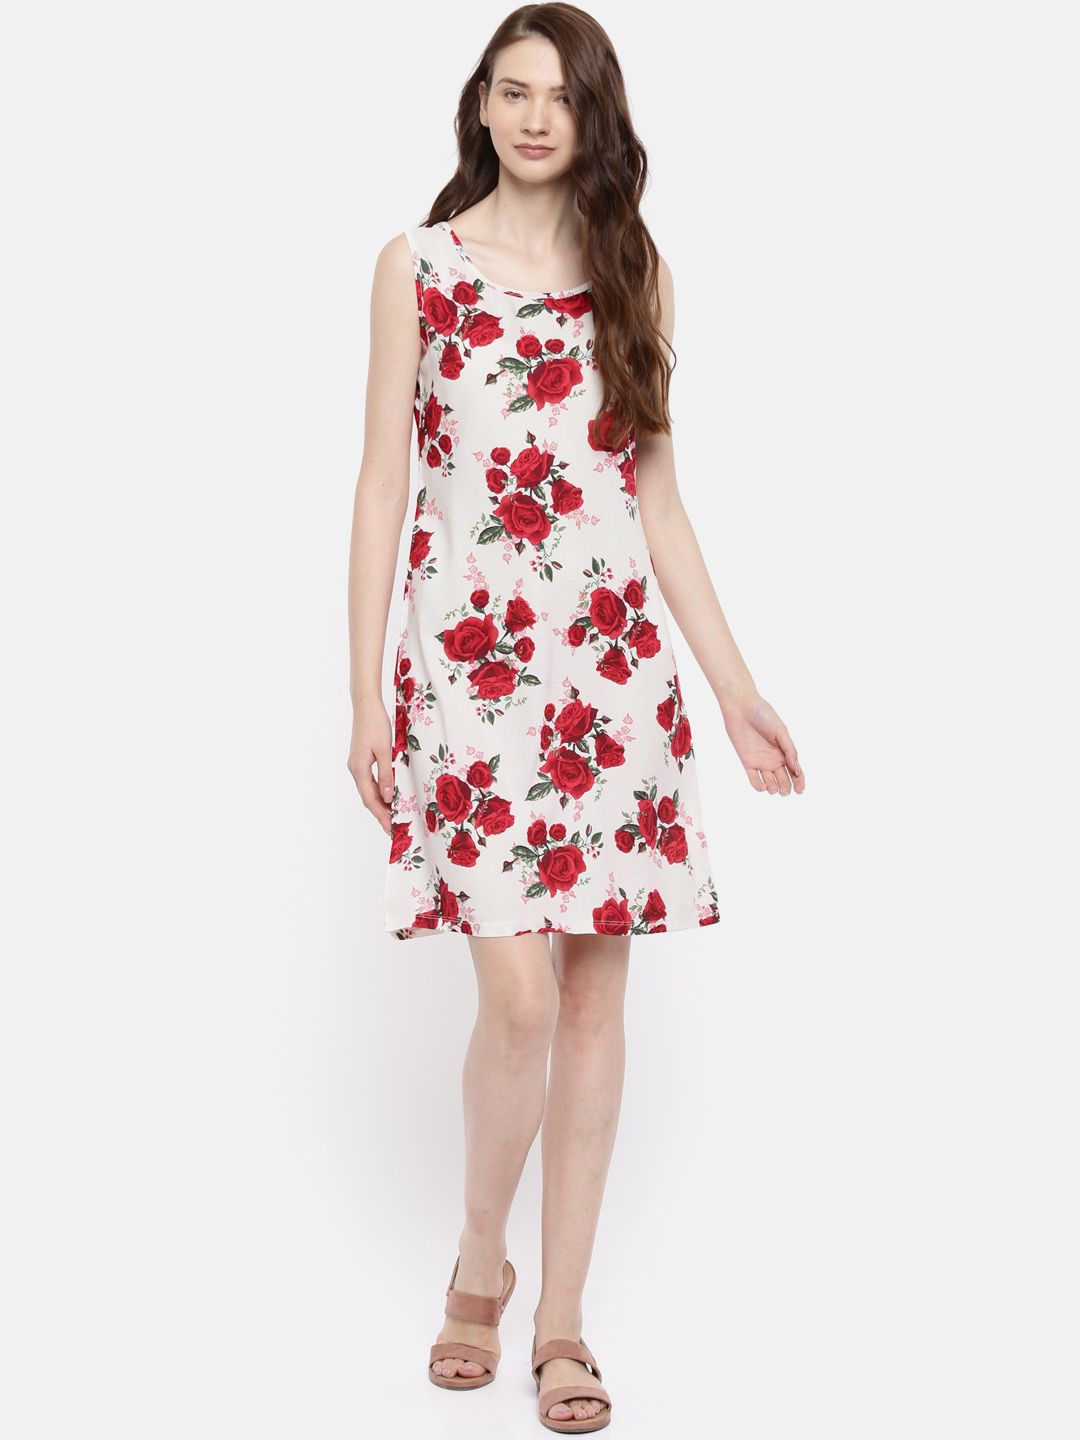 The White & Red Printed Summer Sheath Dress